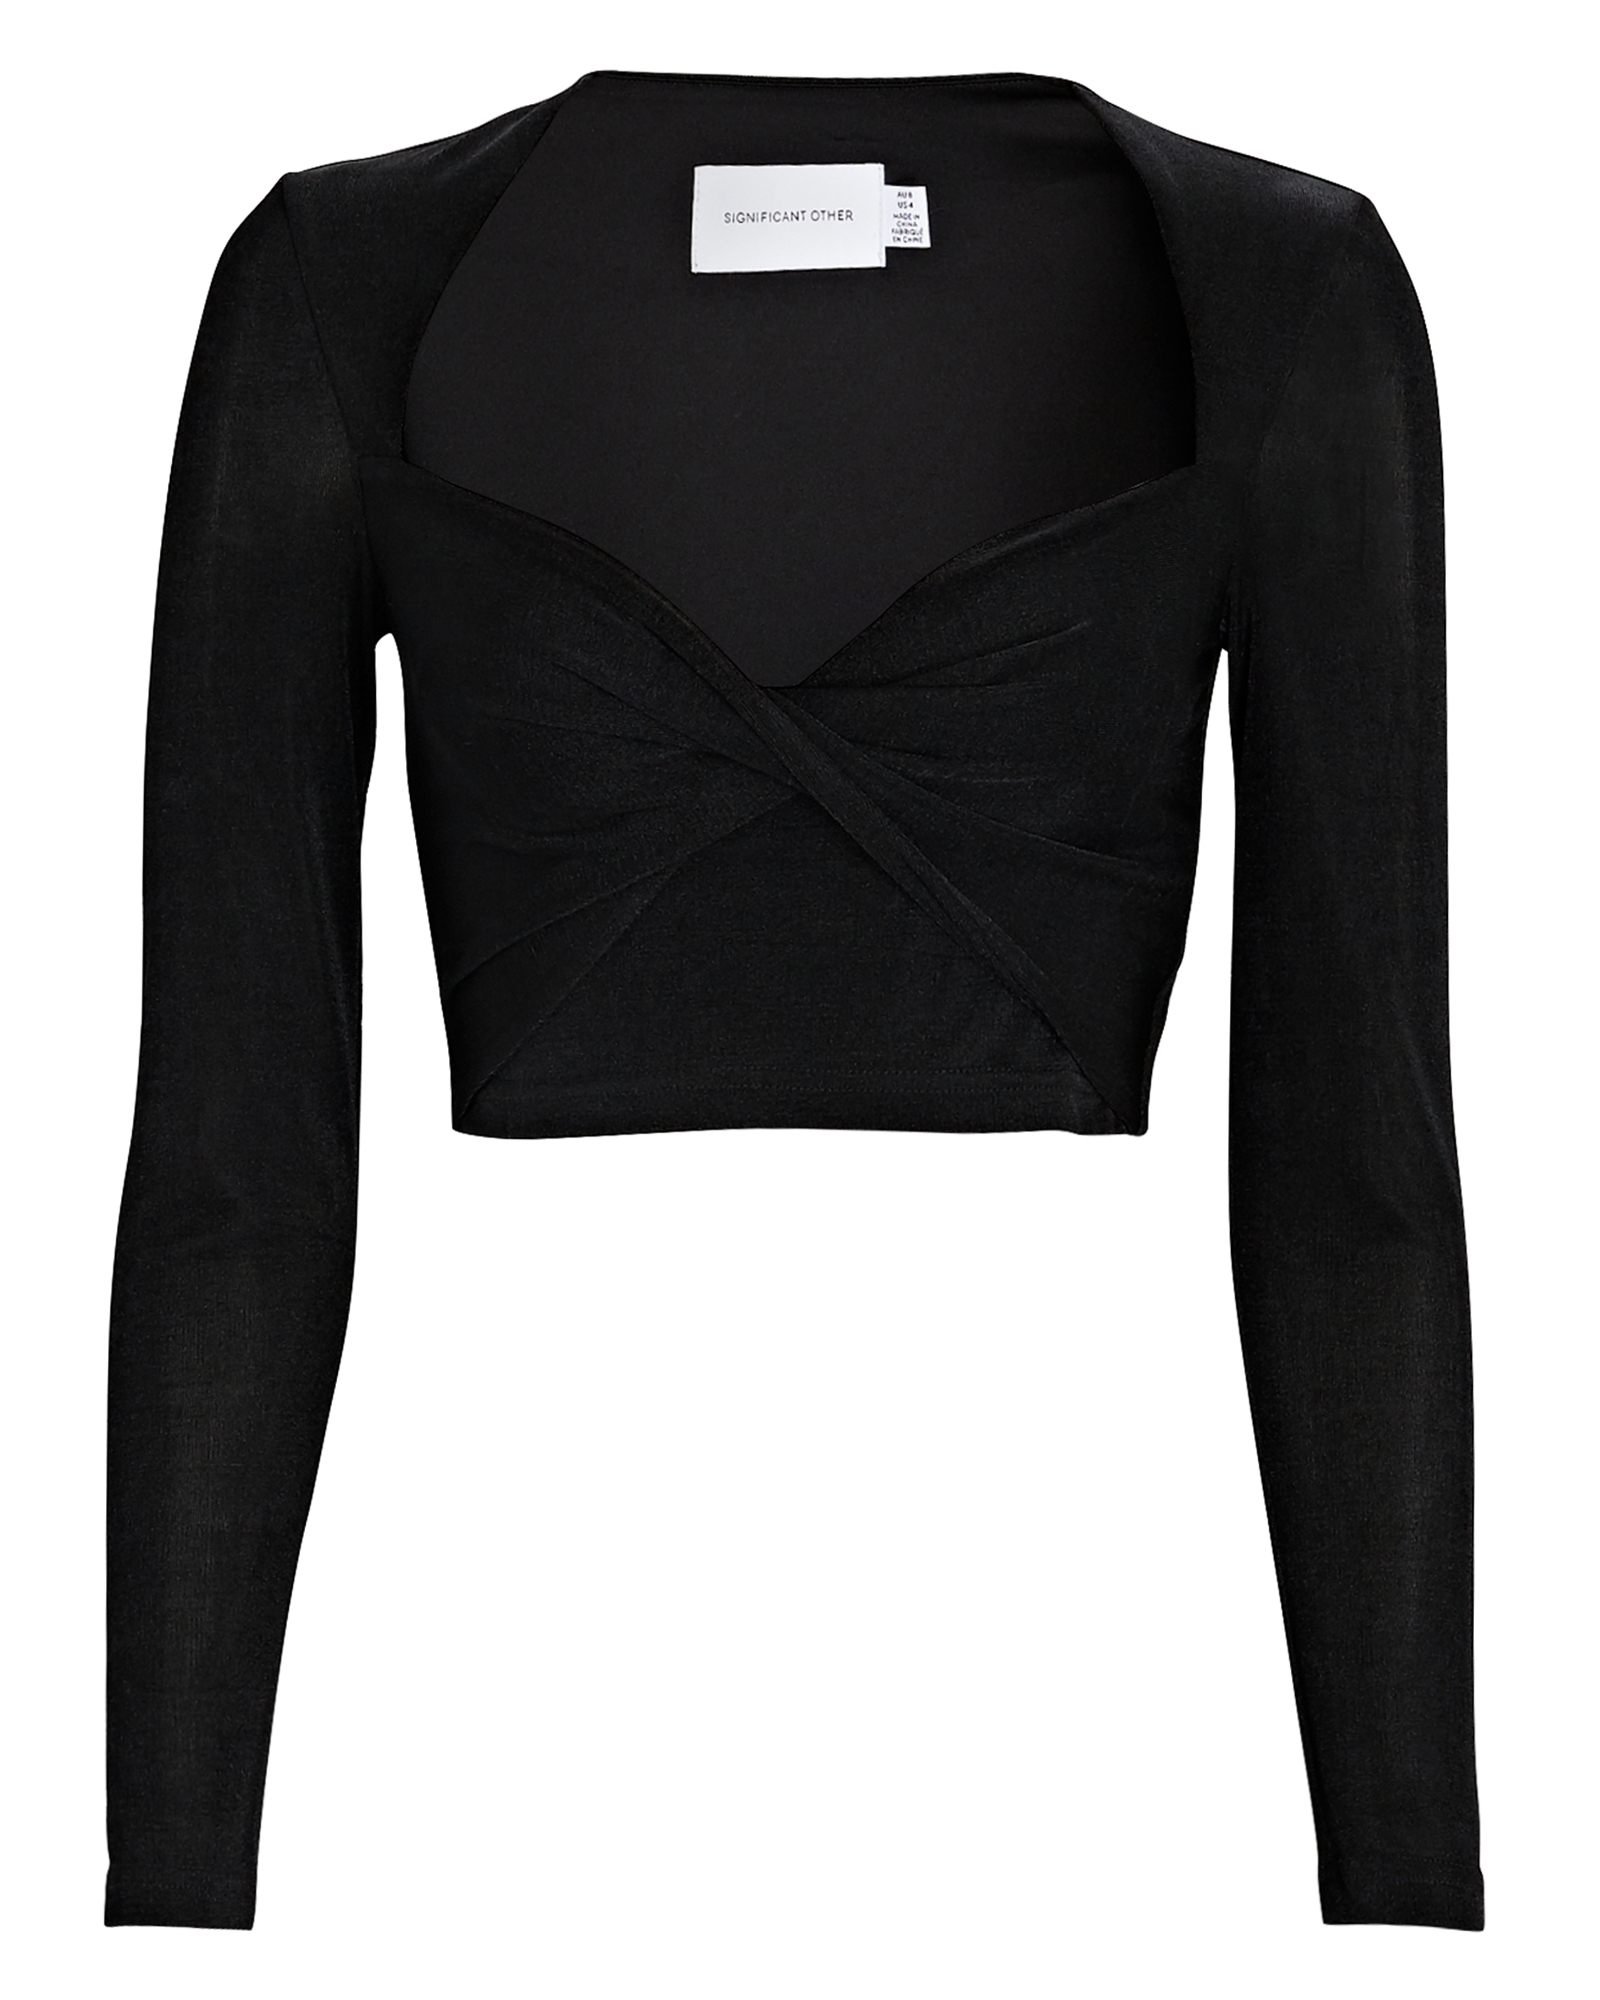 Significant Other Bambi Long Sleeve Crop Top | INTERMIX®